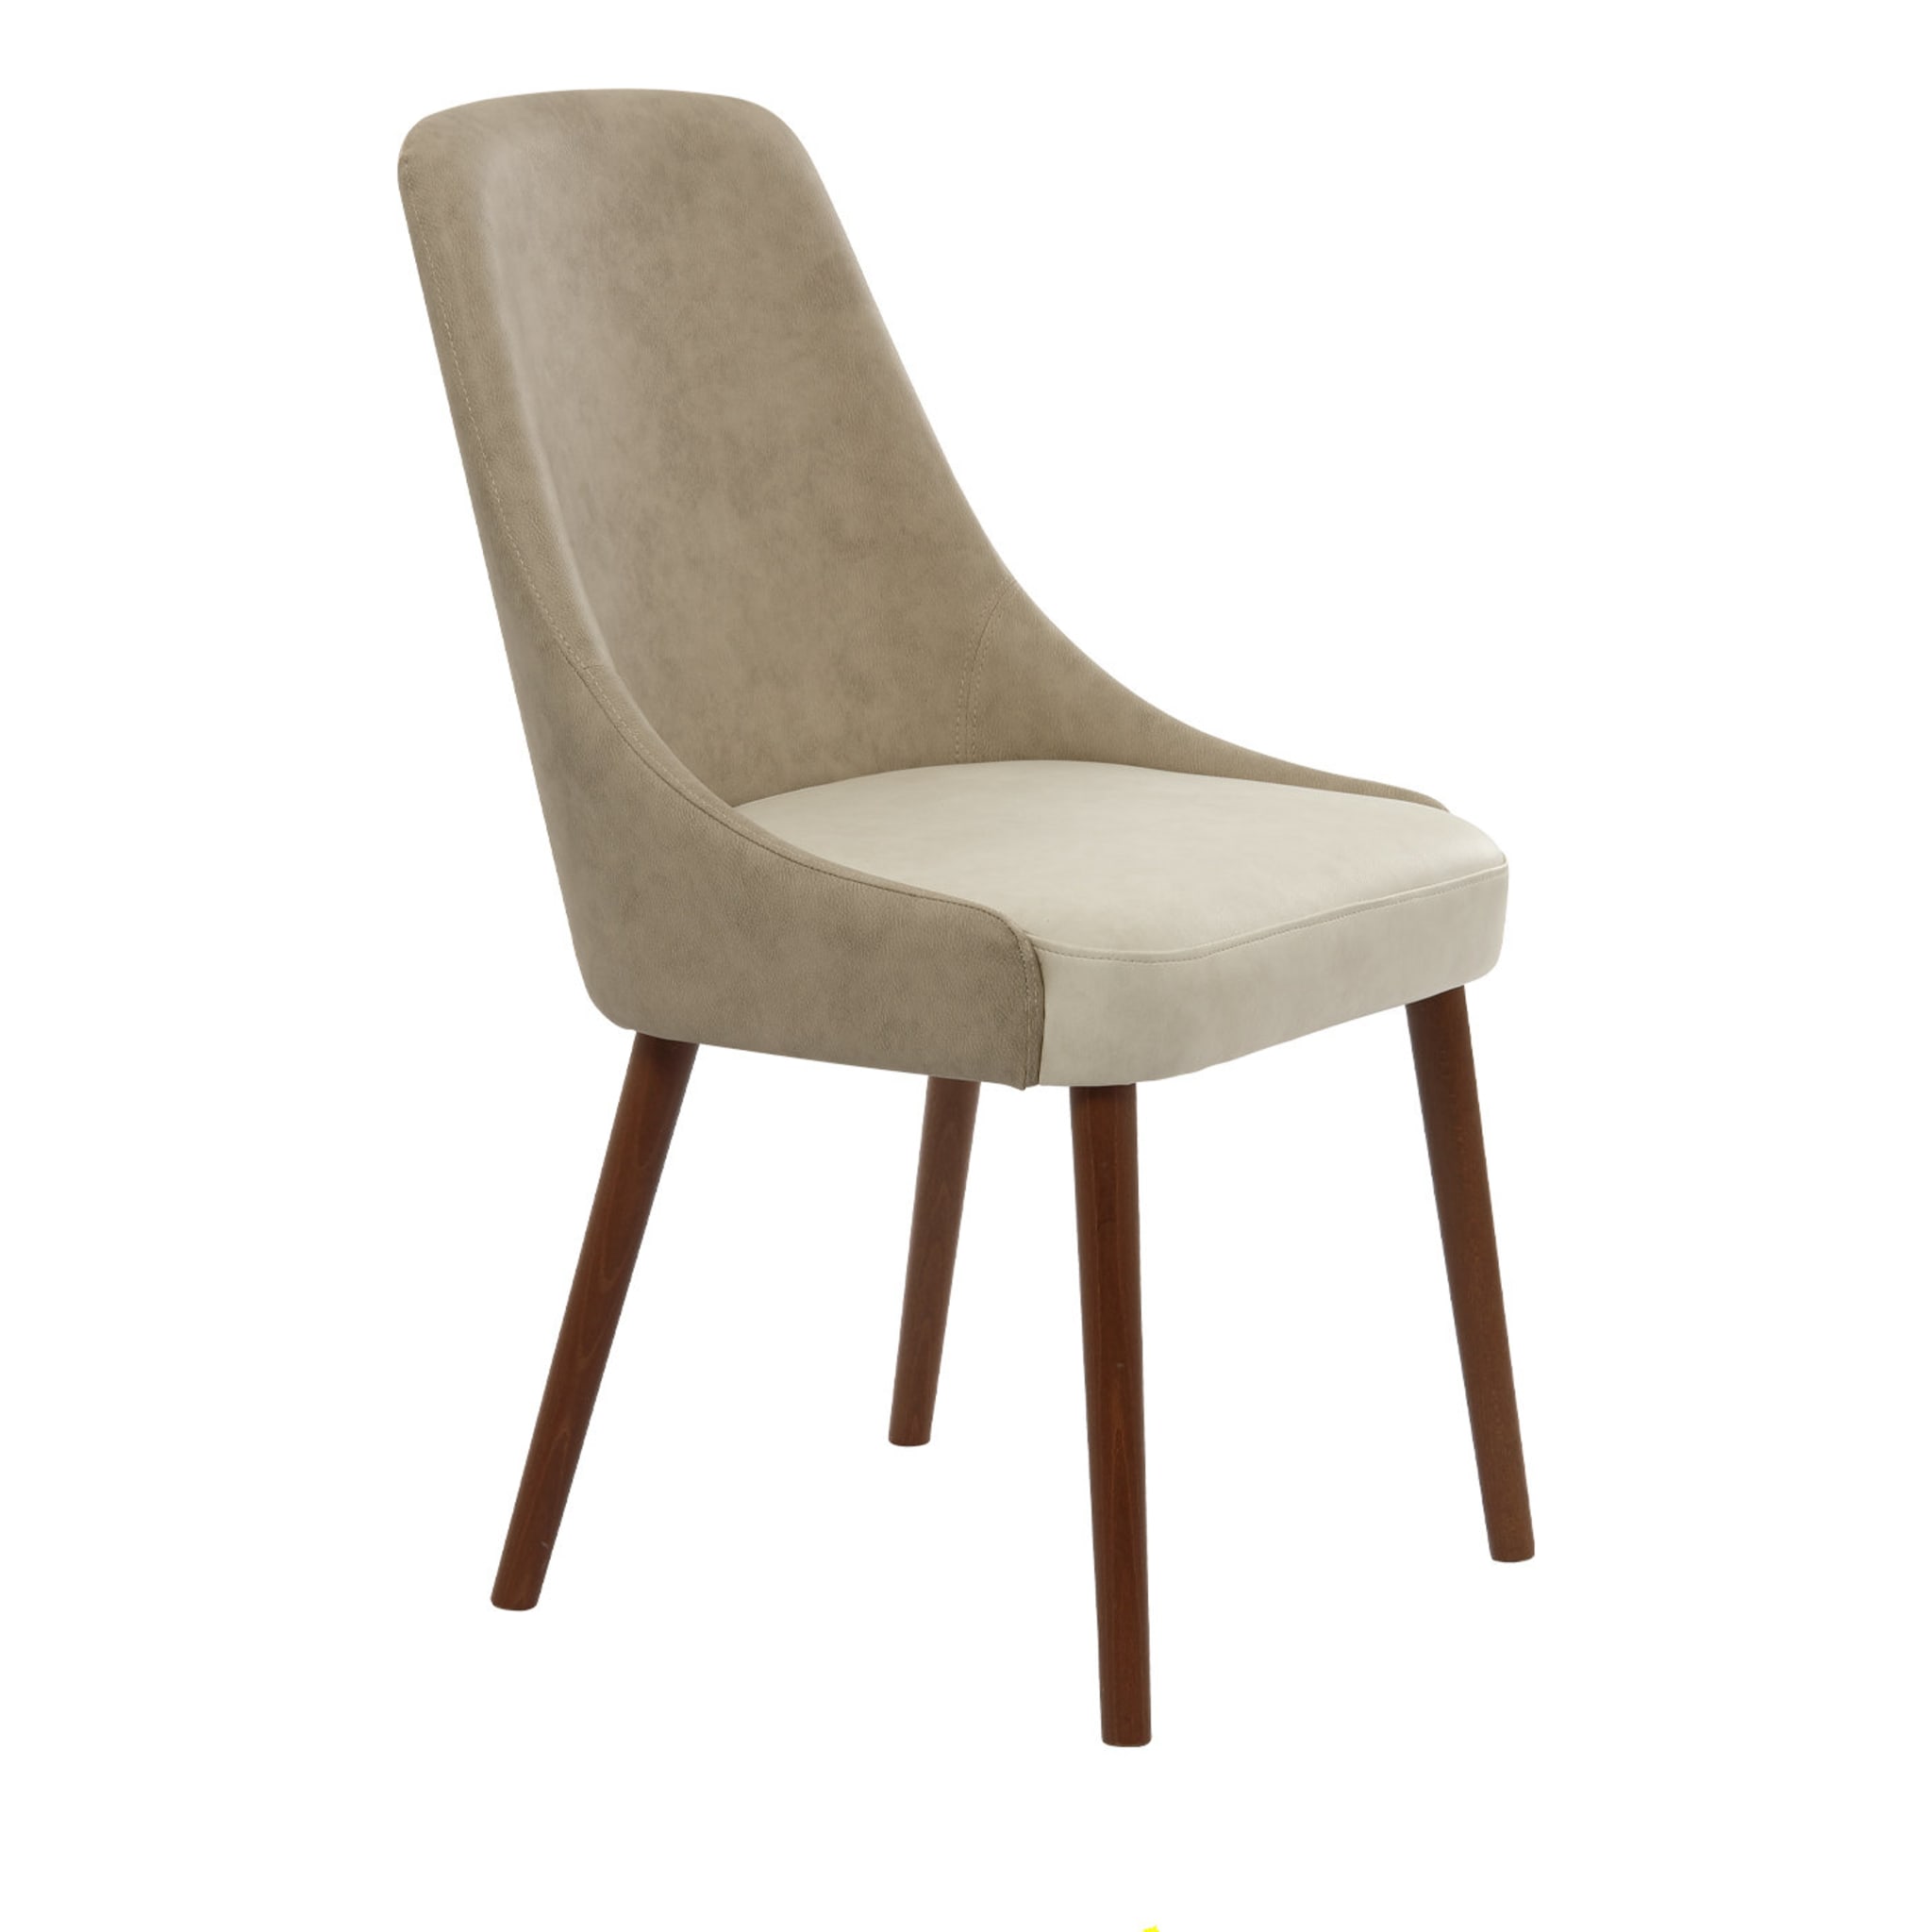 Walter Beige Dining Chair - Main view